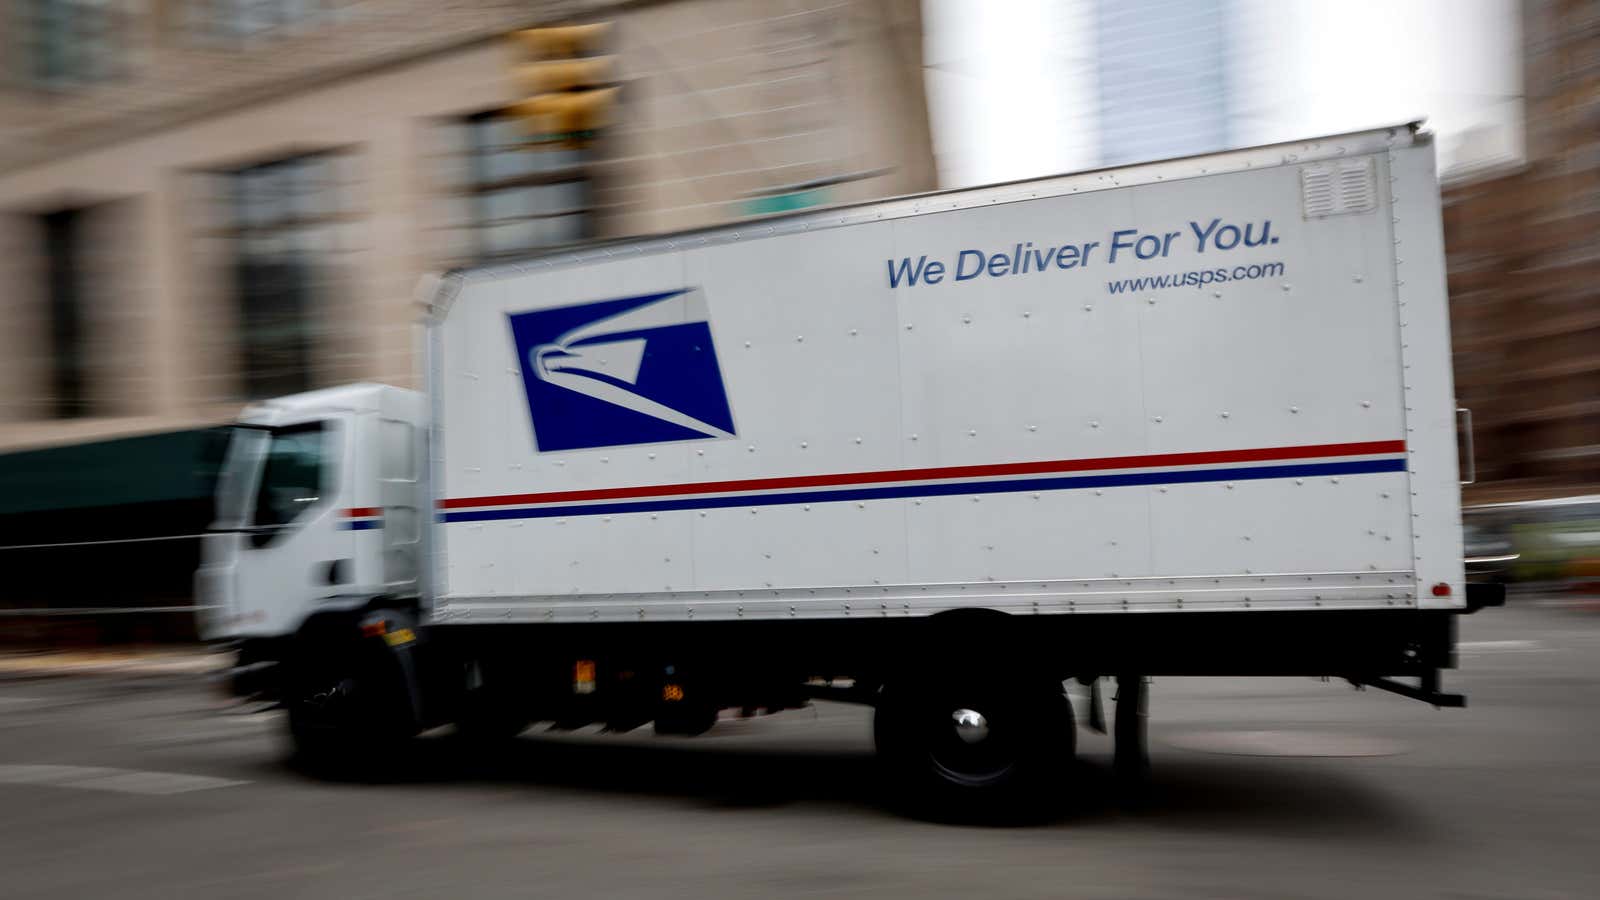 How the US Postal Service spurred innovation in cities